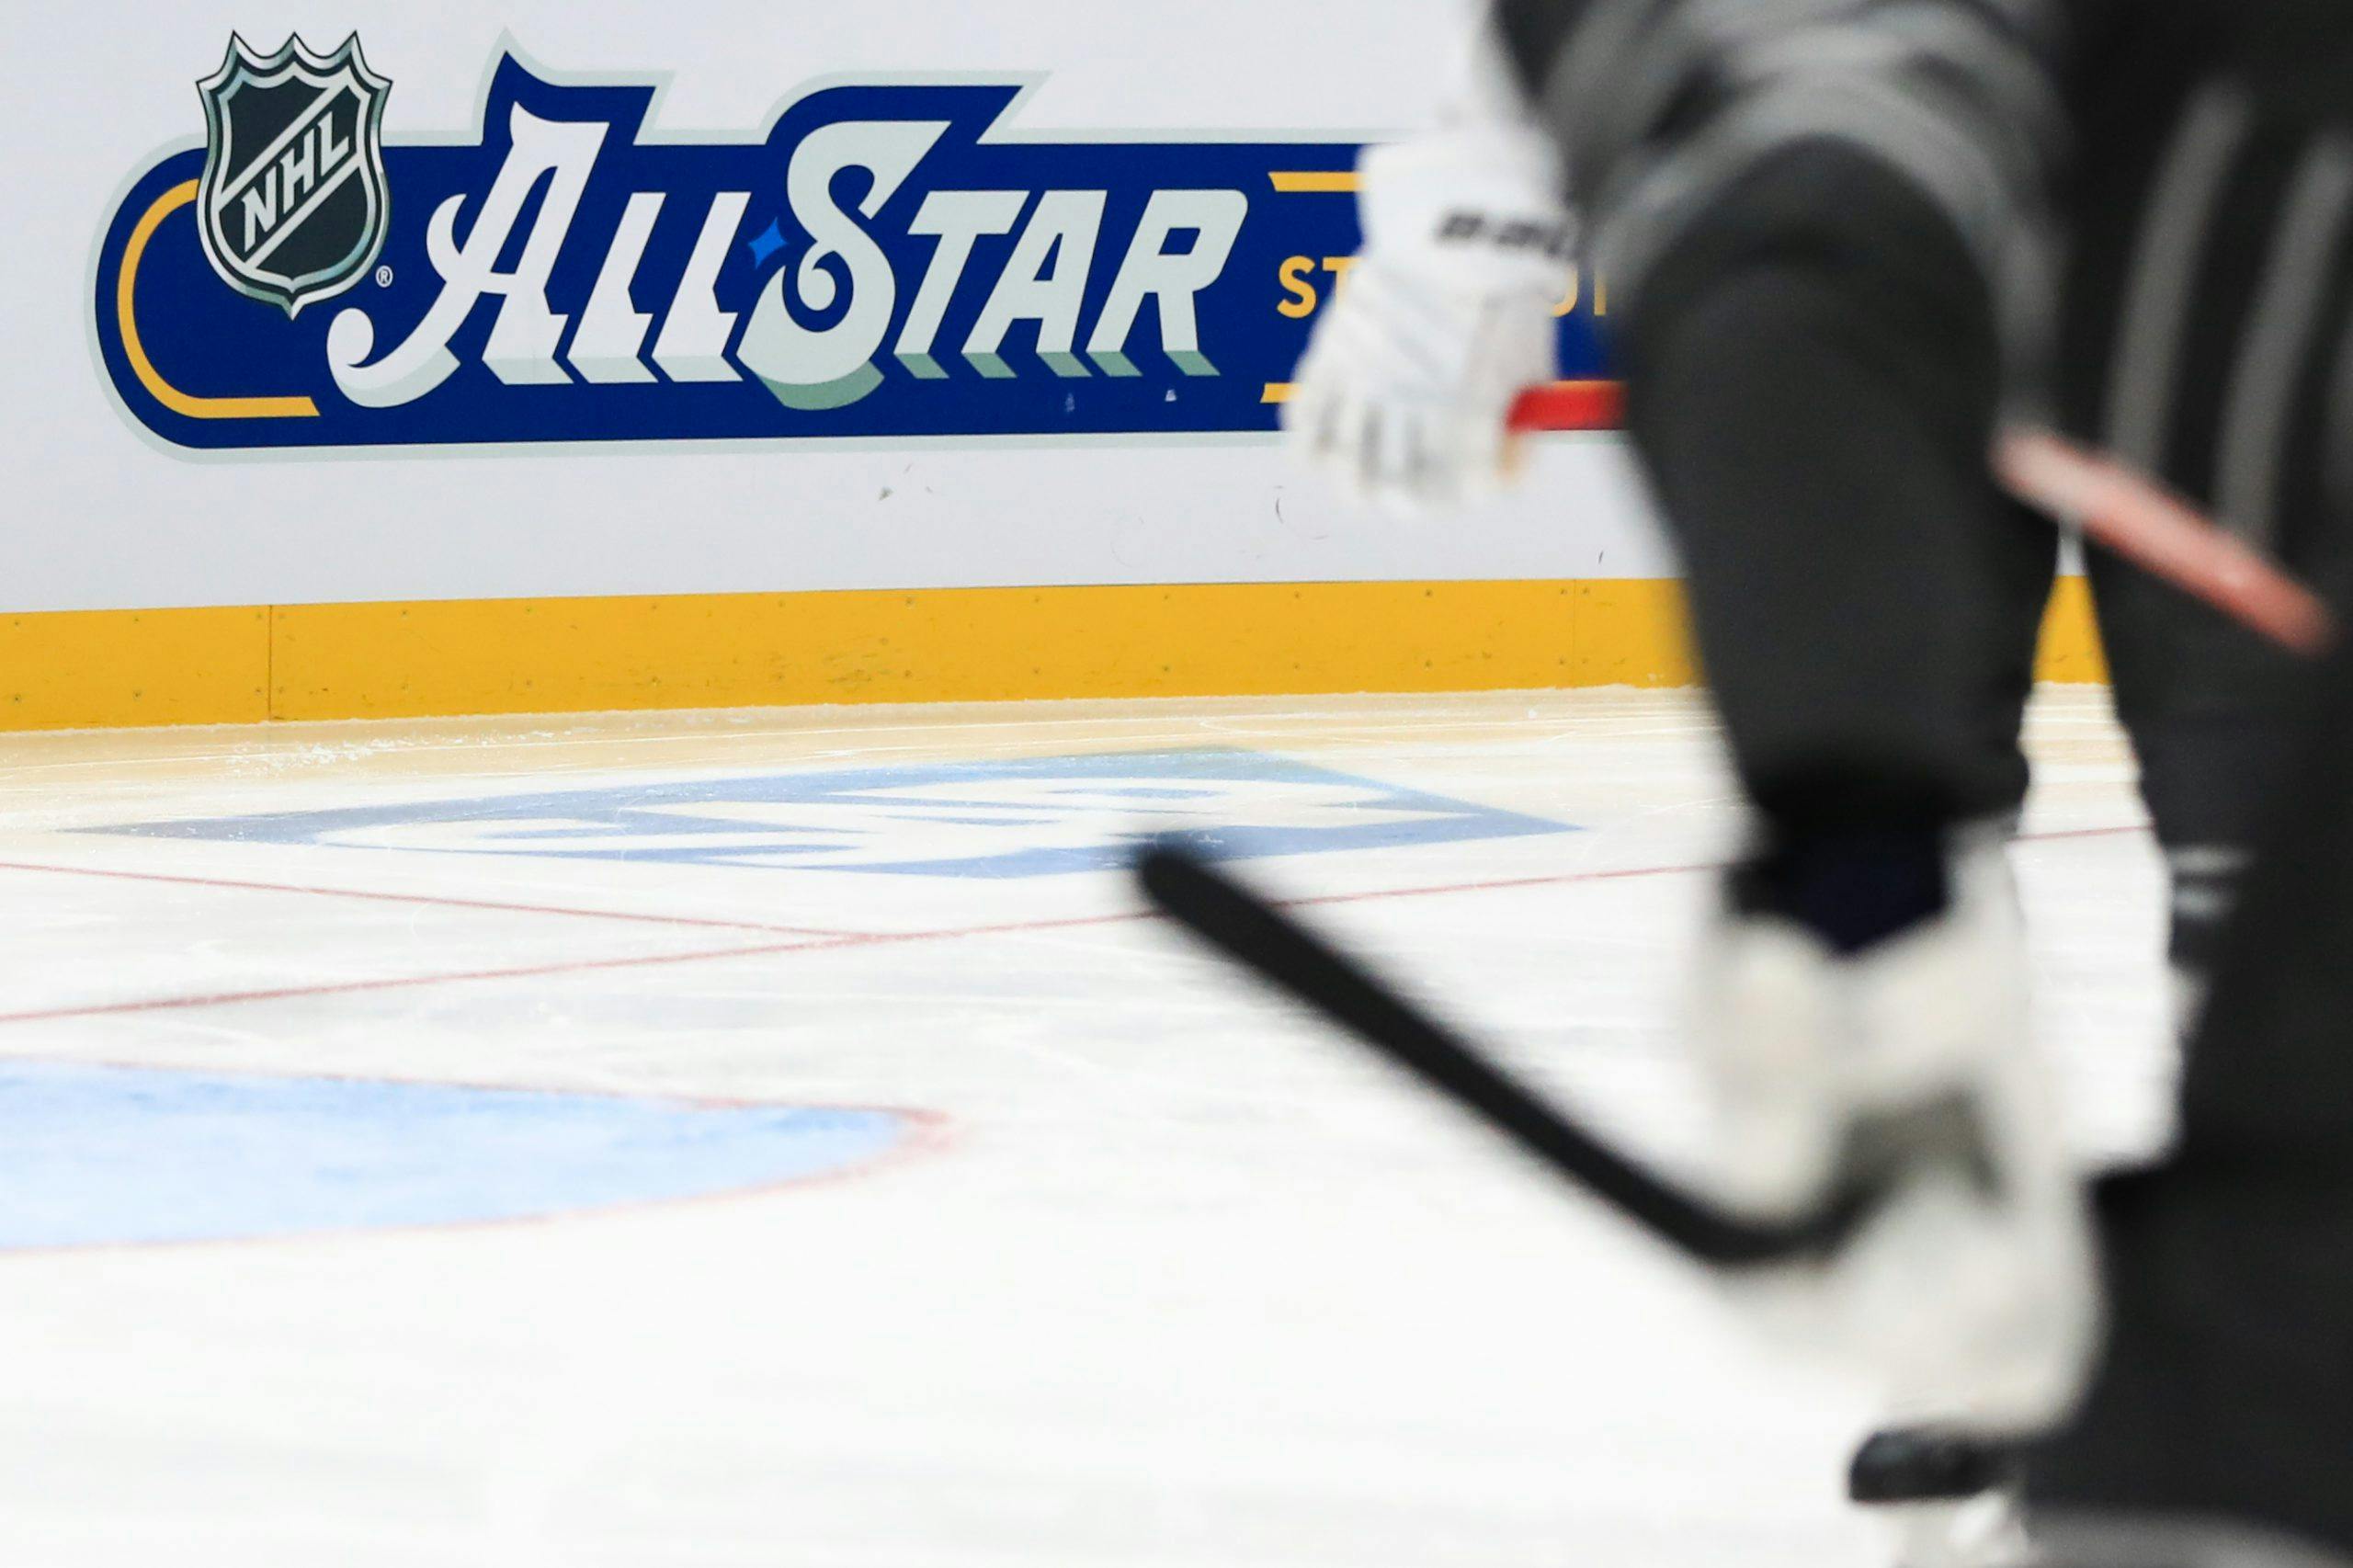 A look at who is participating in what during the NHL All-Star skills competition